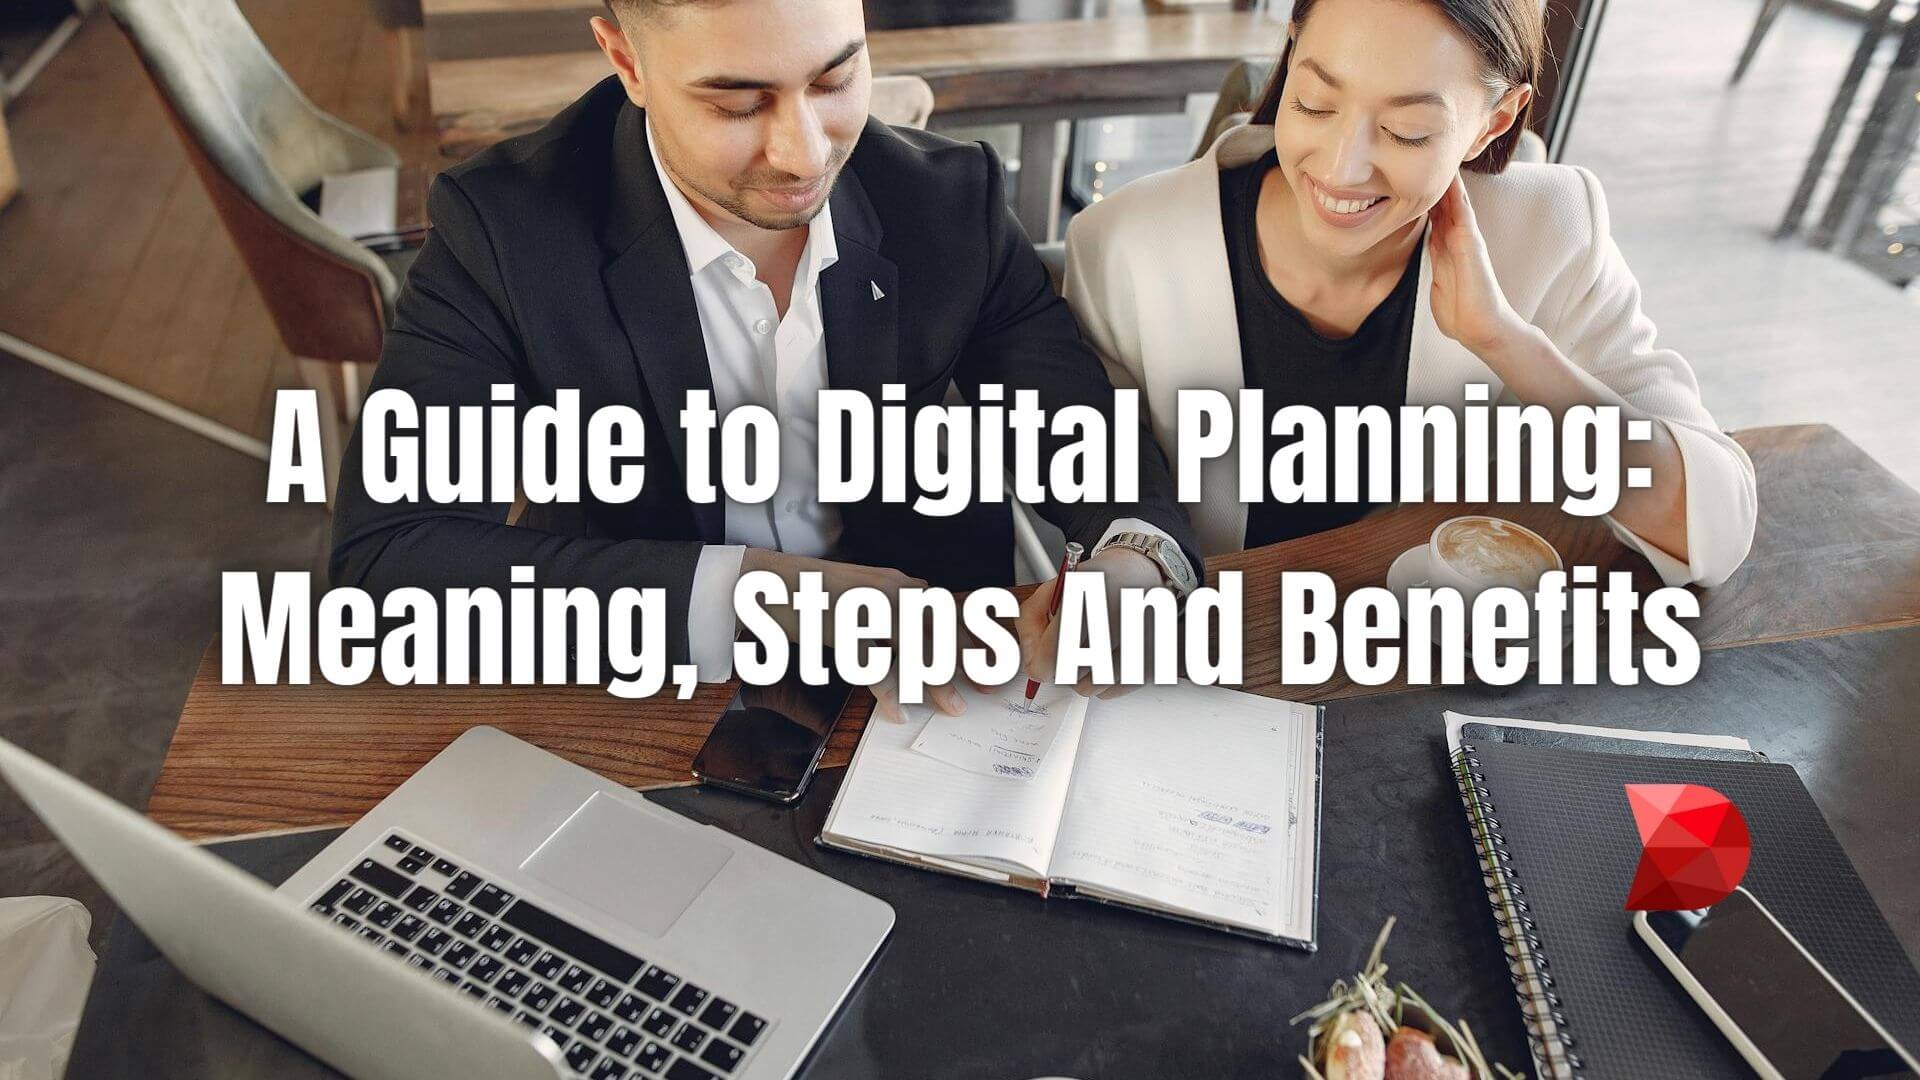 Master digital planning with our insightful guide. Explore its meaning, essential steps, and numerous benefits for your business's success.